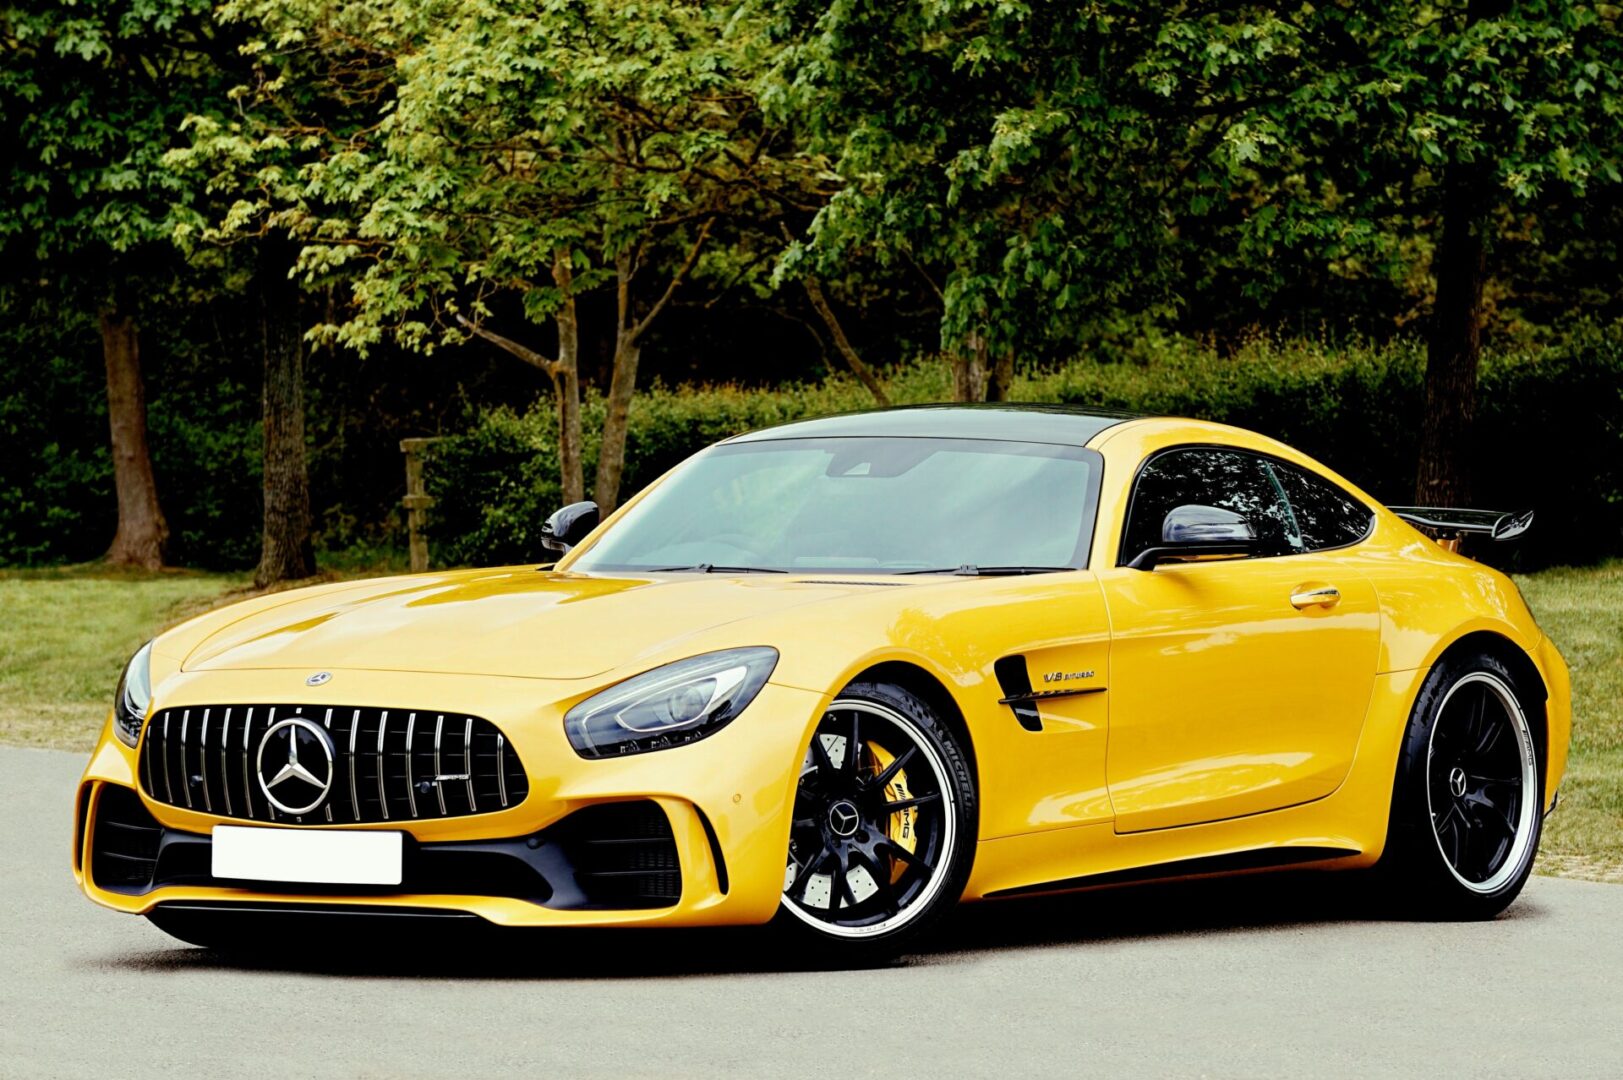 A yellow mercedes benz parked on the side of the road.